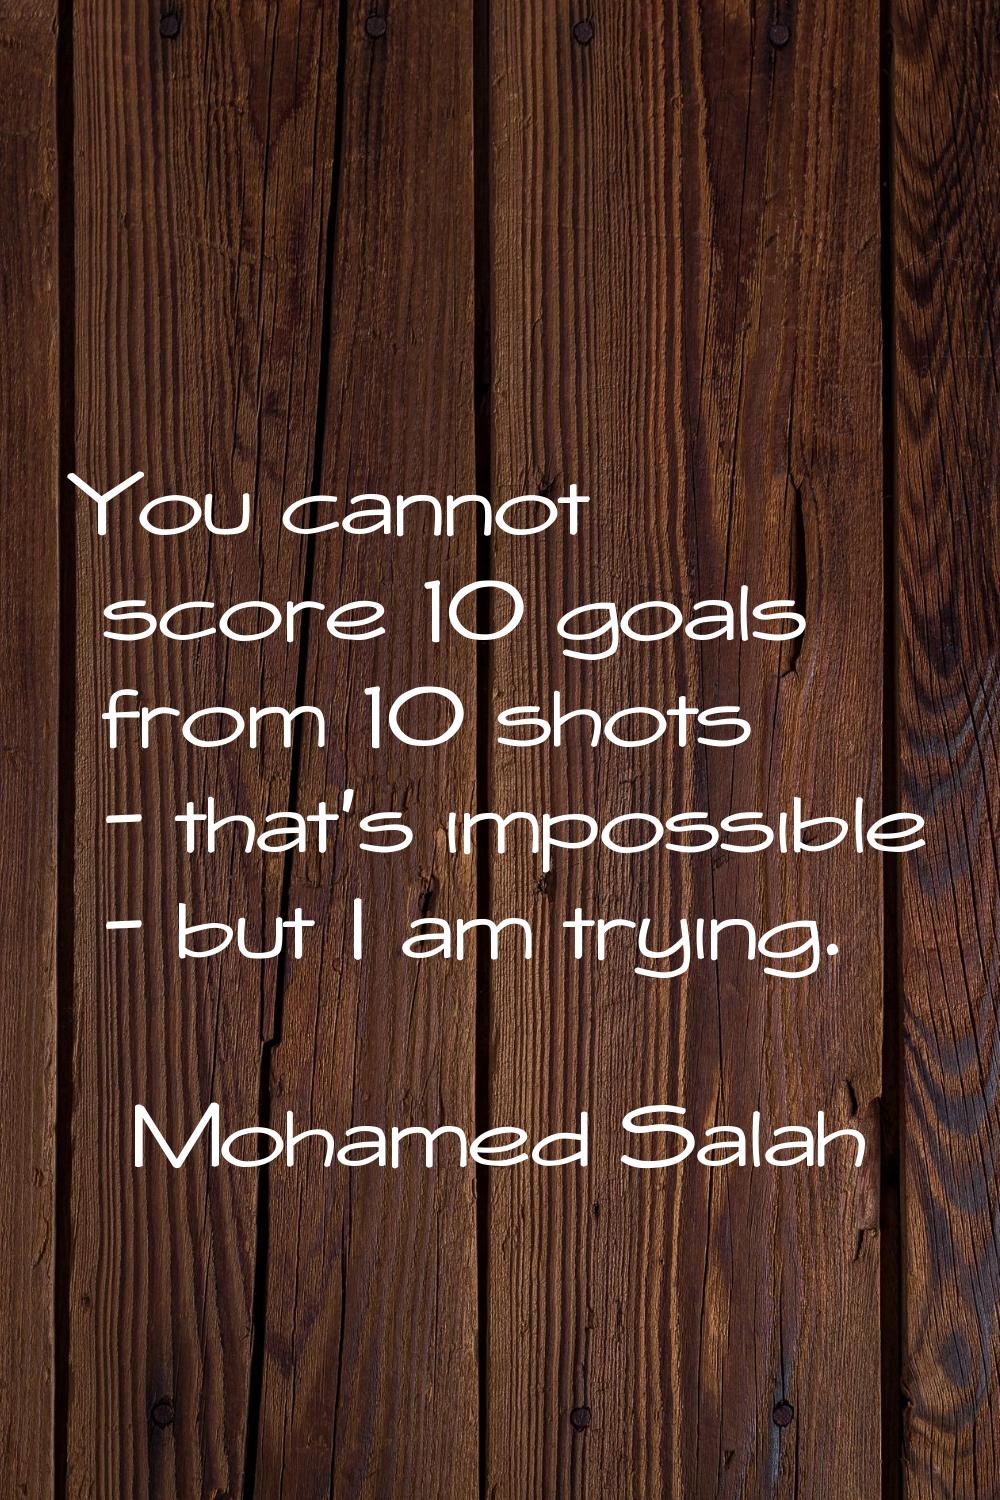 You cannot score 10 goals from 10 shots - that's impossible - but I am trying.